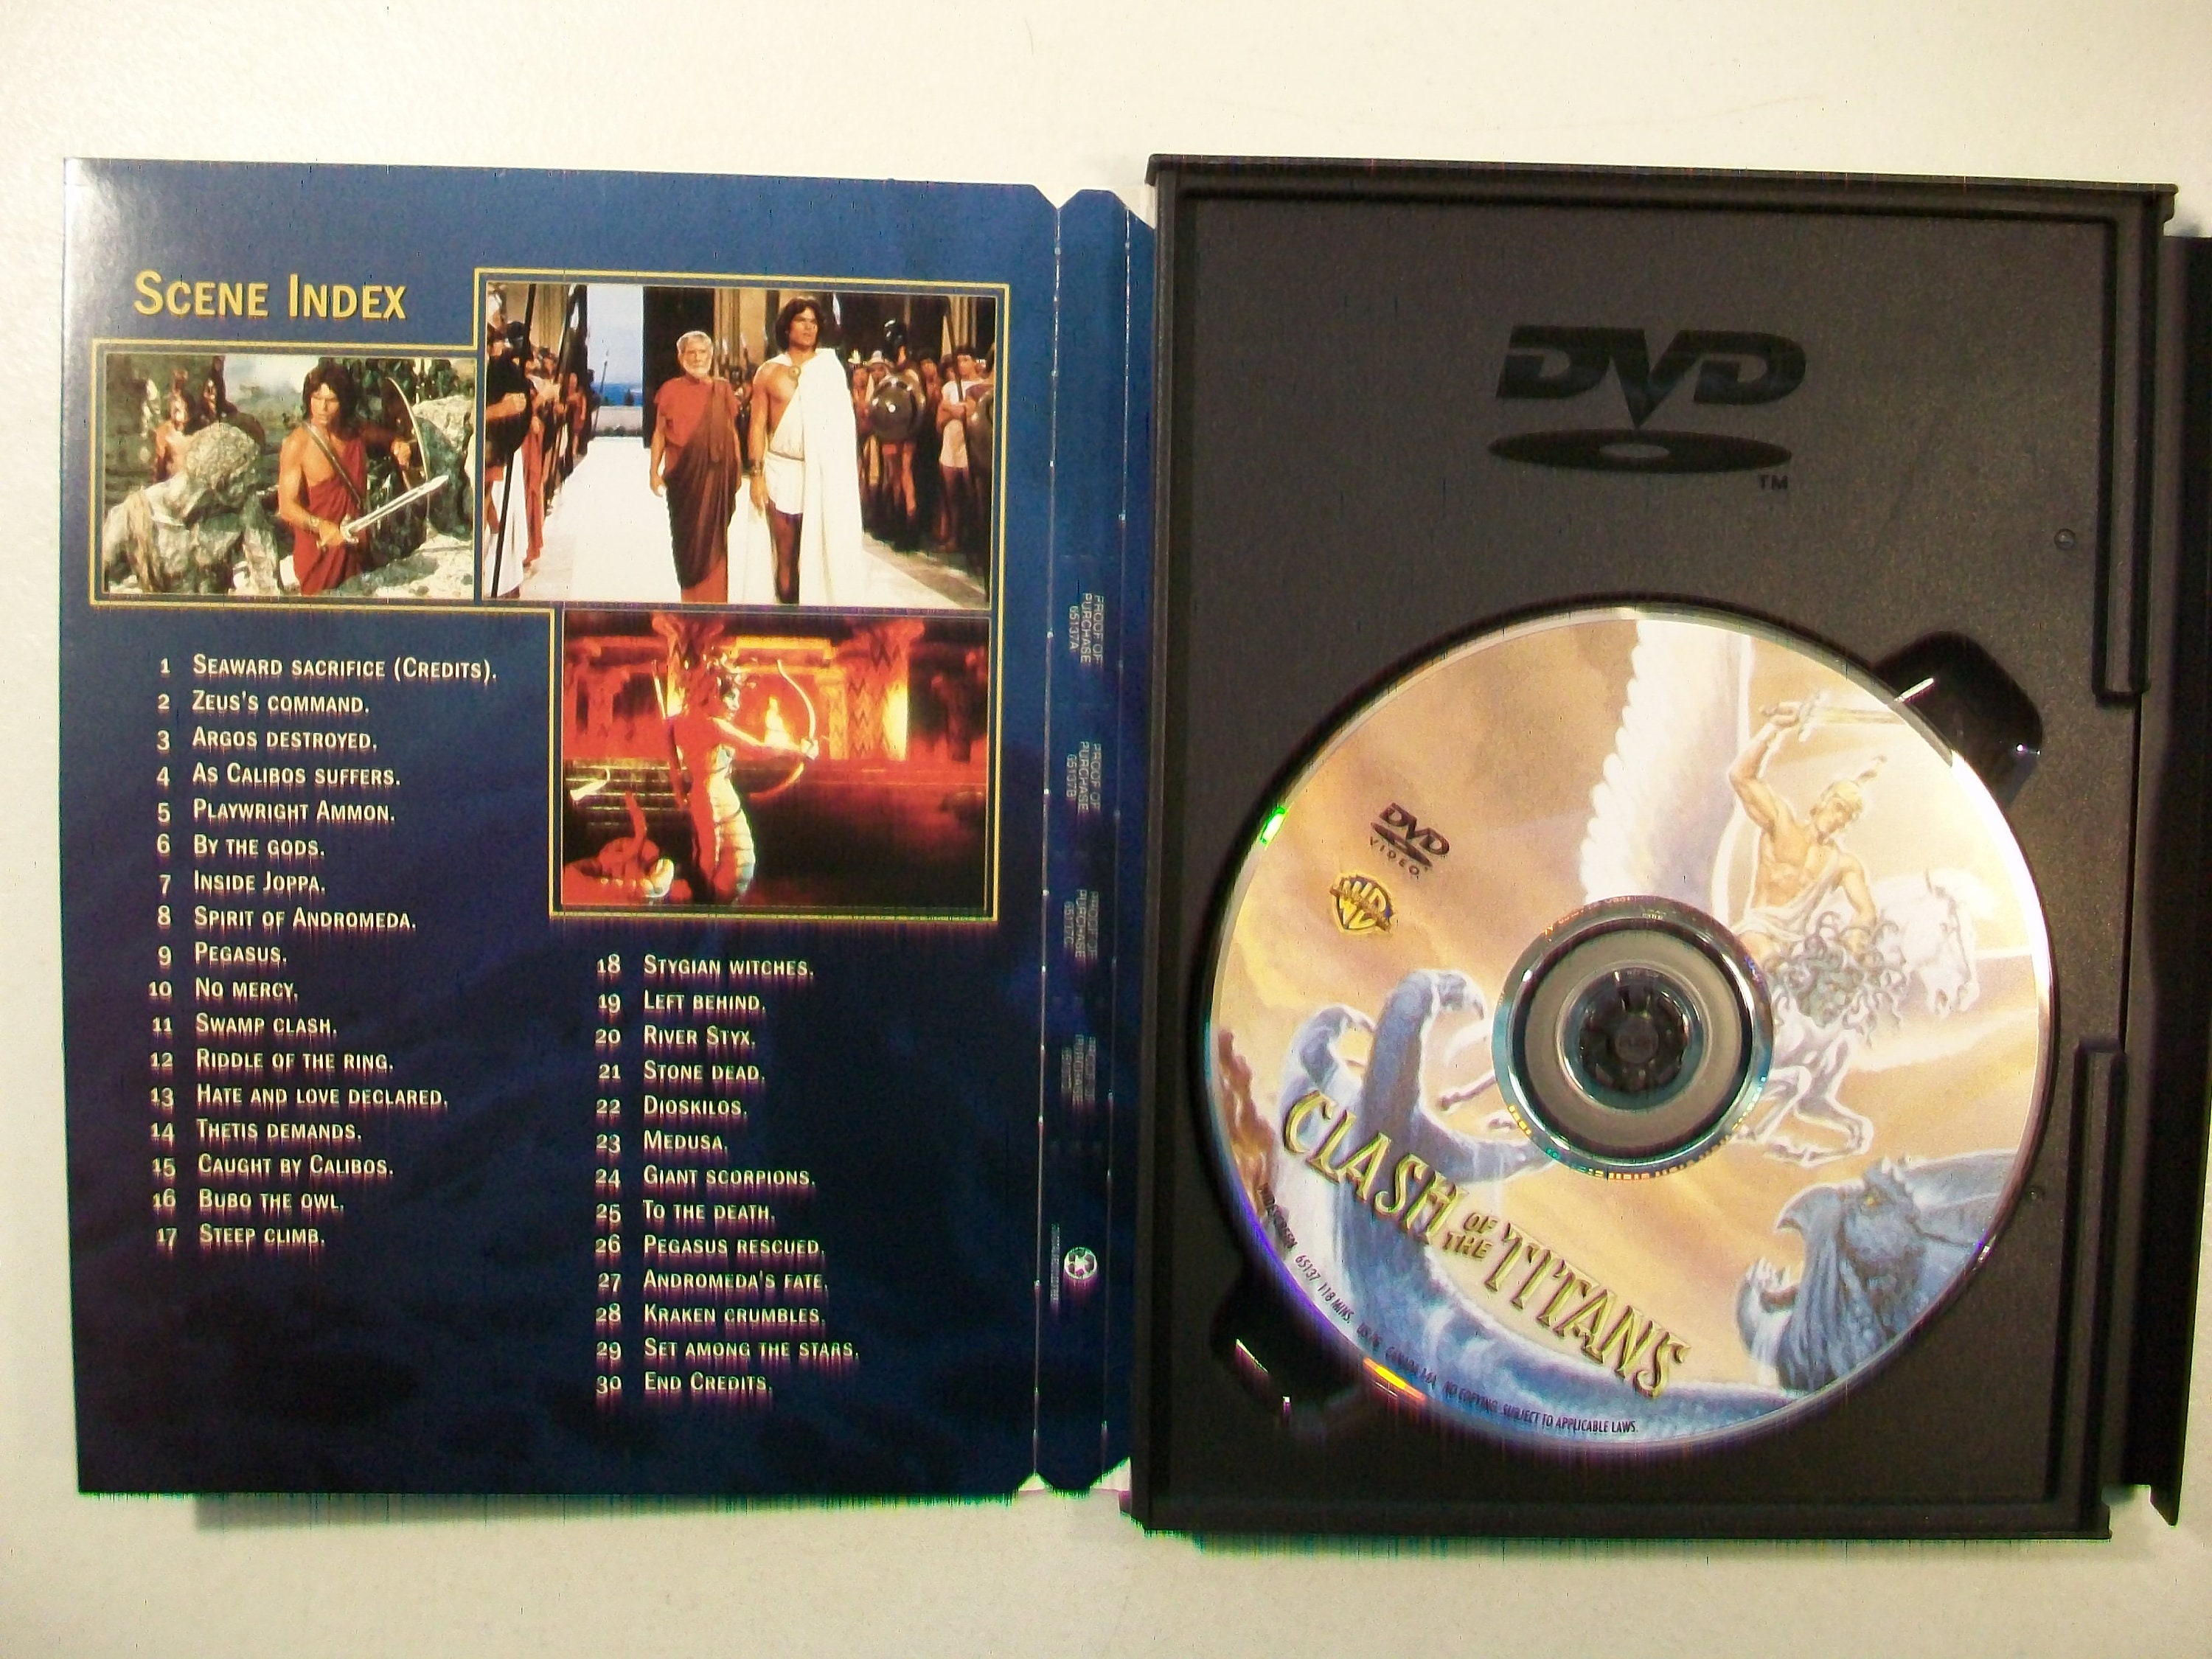 CLASH OF THE TITANS (1981) - Used DVD